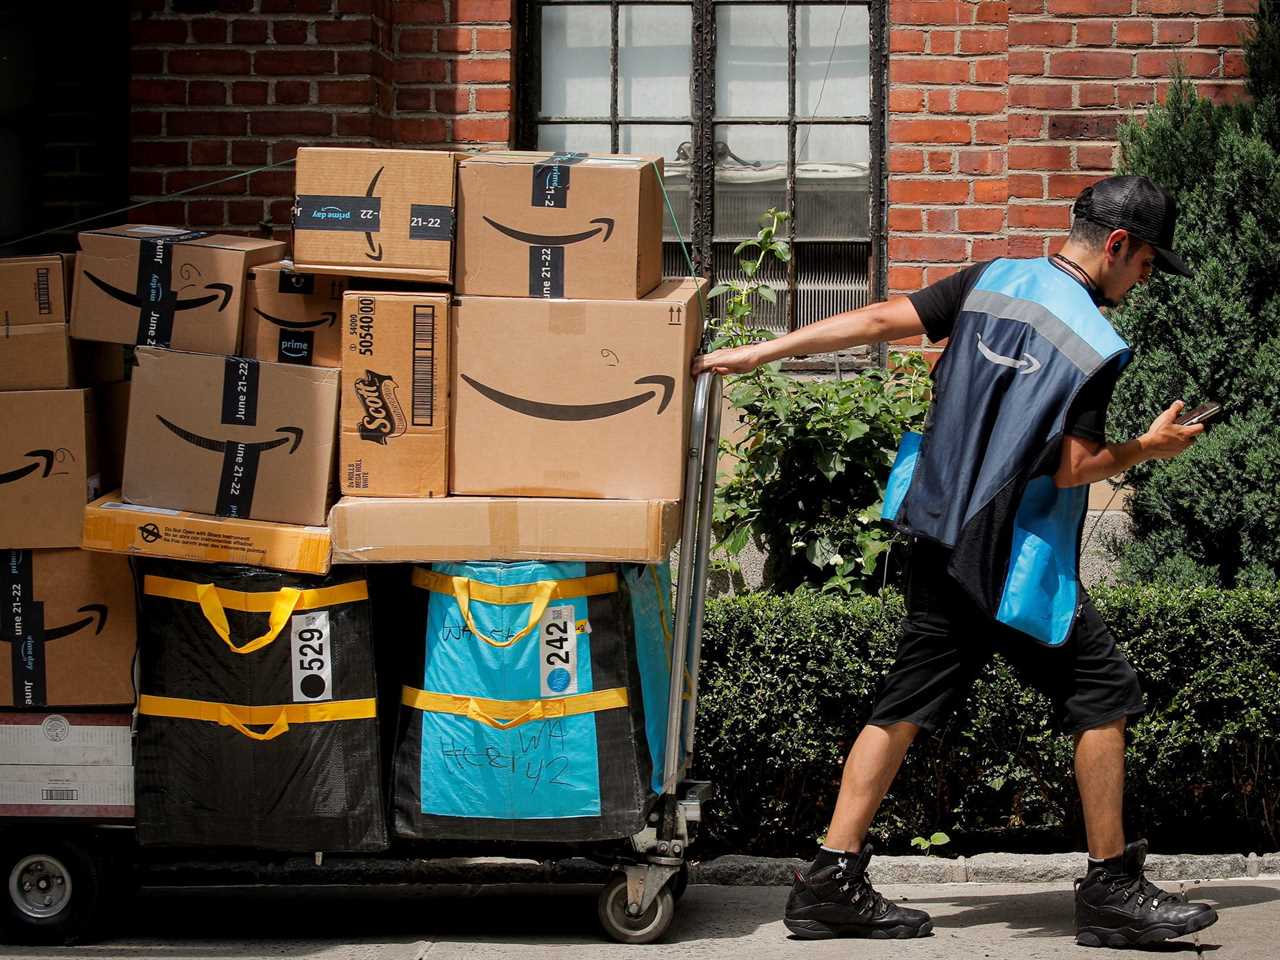 An Amazon worker pulls a cart full of Amazon packages.